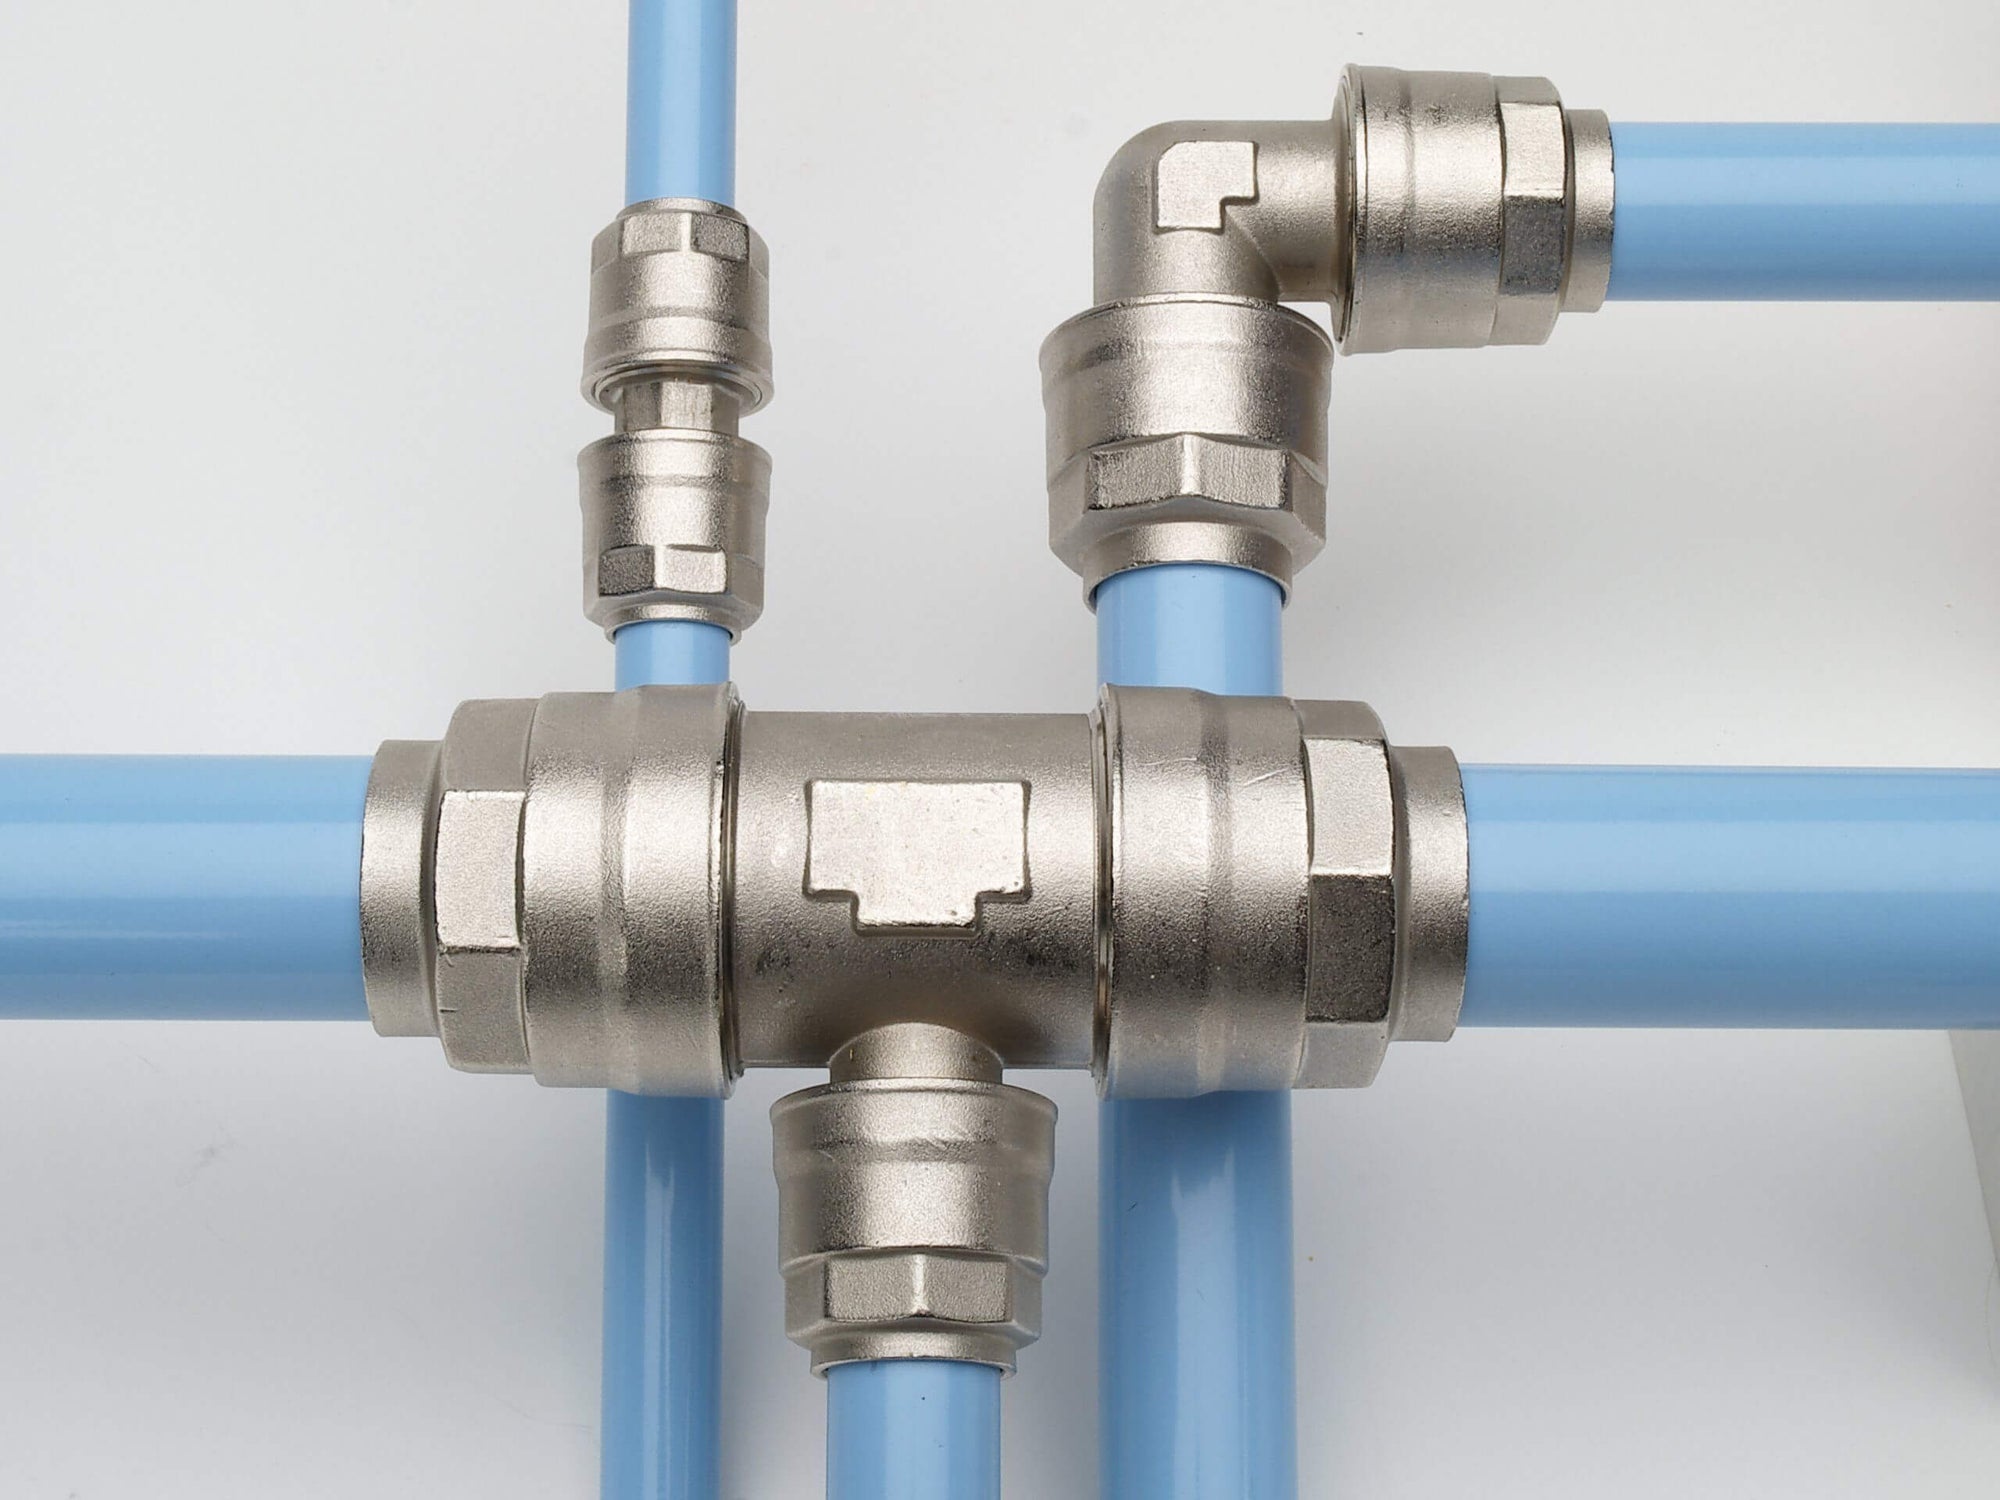 Infinity Compressed Air Piping Systems Infinity-Piping-Systems